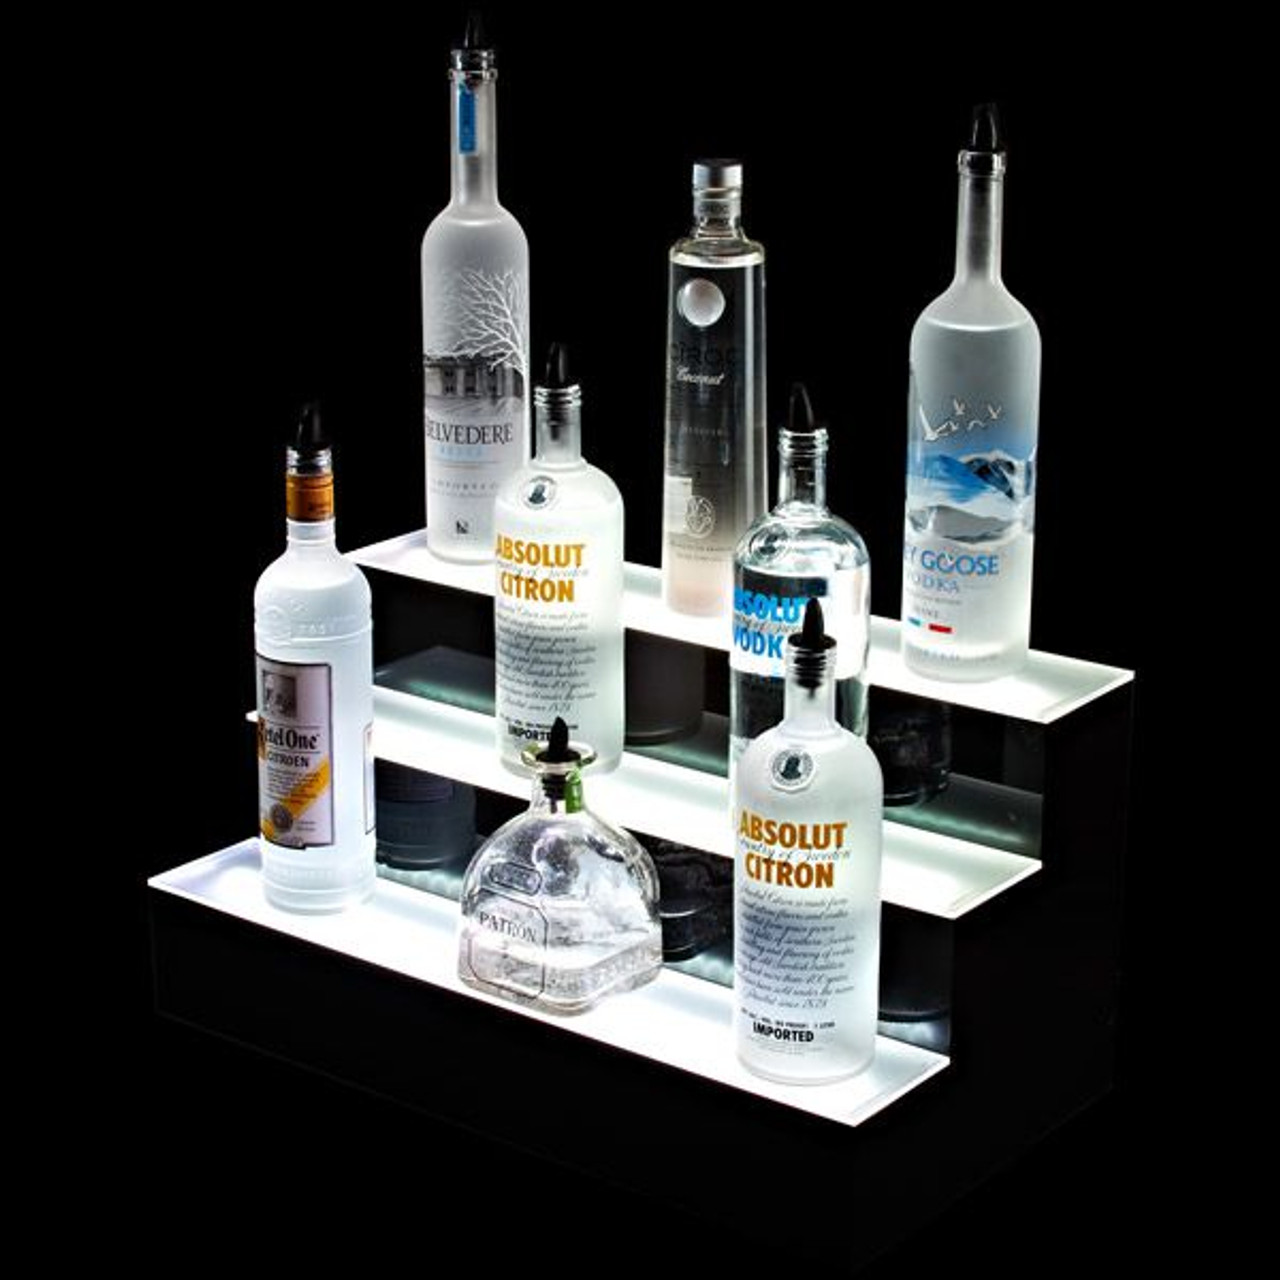 How Belvedere Vodka Maximize Sales with Product Display Stand